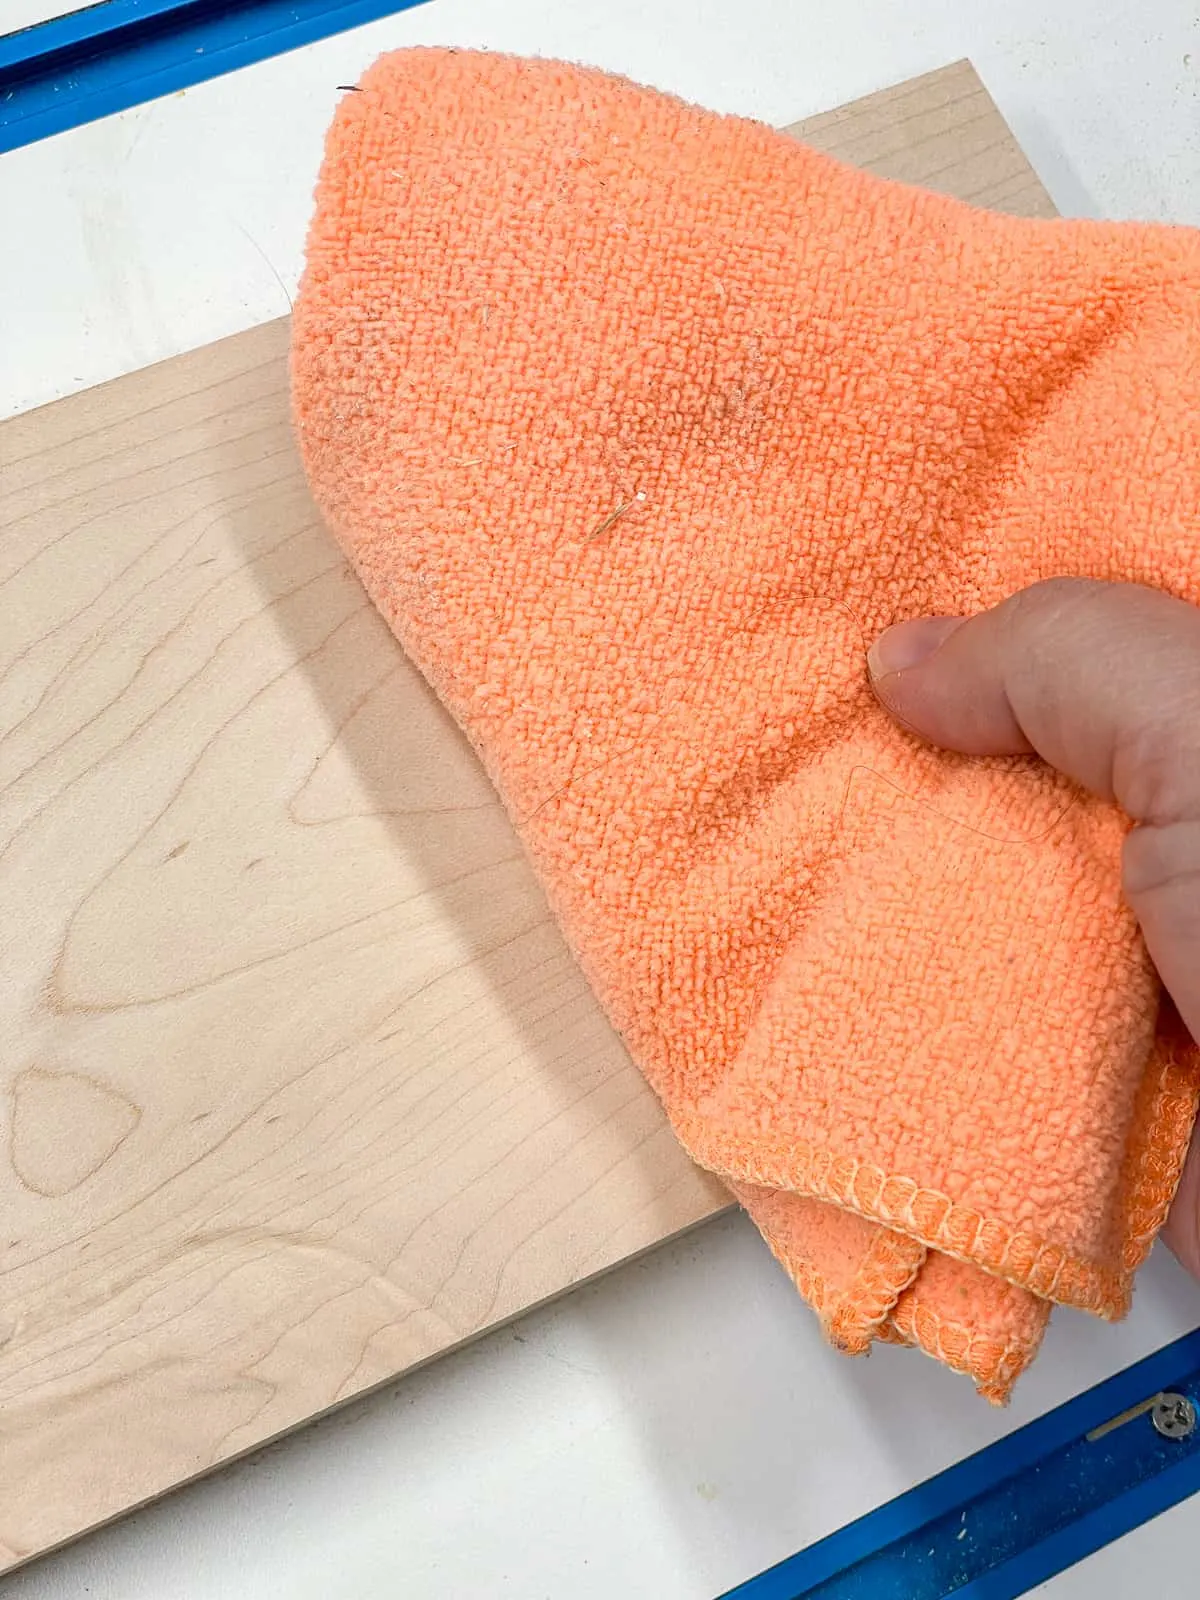 Dad Uses Tack Cloths After Sanding to Ensure a Smooth Finish 